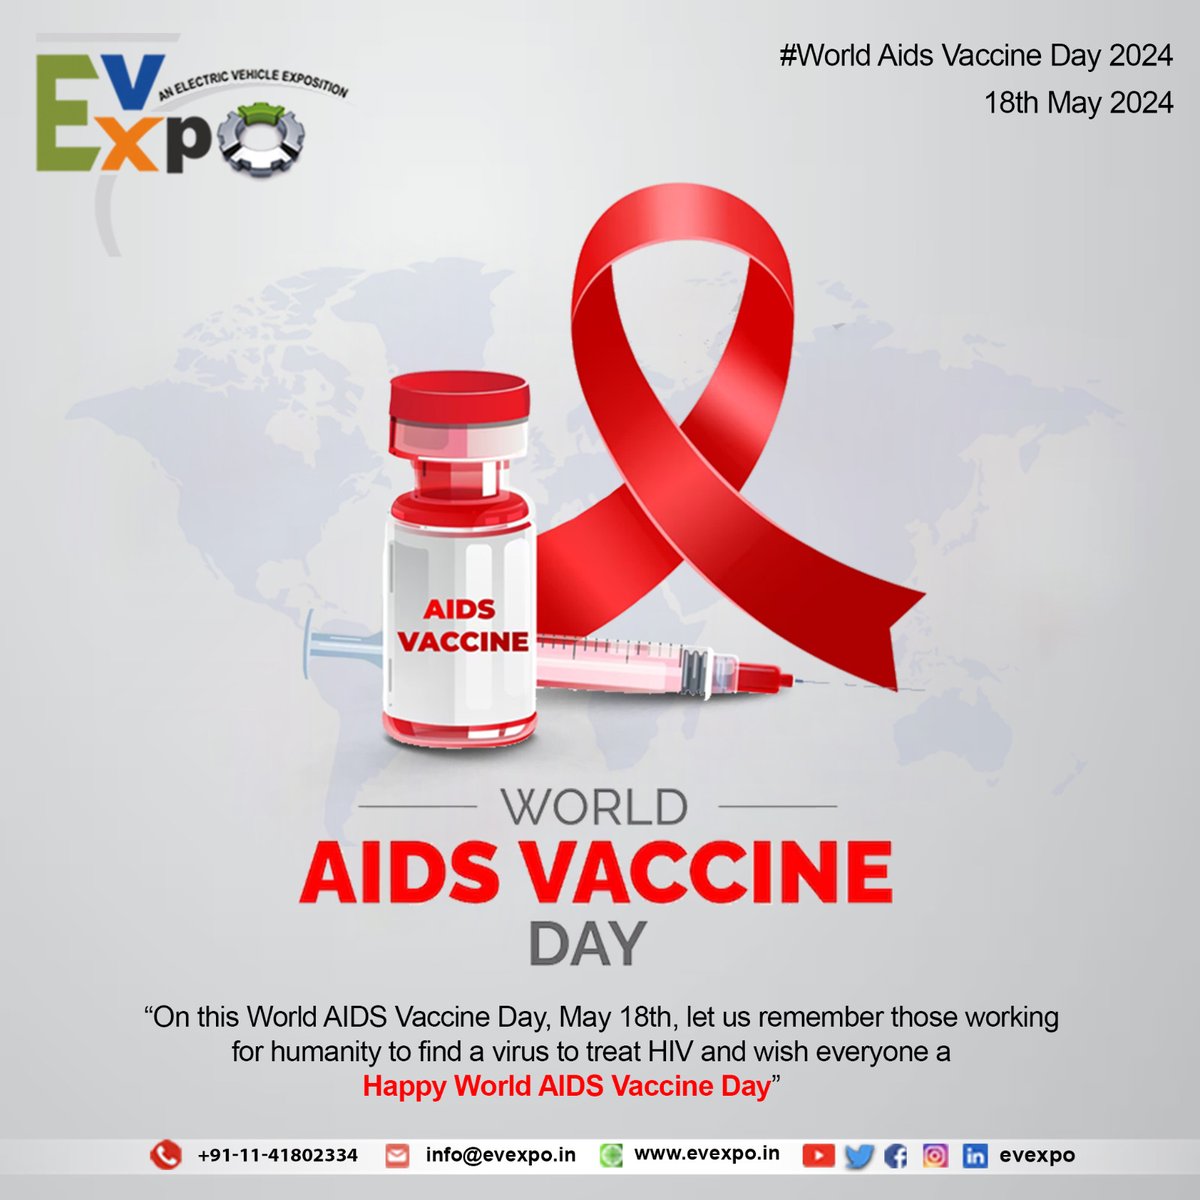 Today, on World AIDS Vaccine Day, EvExpo reaffirms its commitment to supporting HIV/AIDS vaccine research. This day highlights the tireless efforts of scientists, healthcare workers, and advocates dedicated to eradicating HIV/AIDS. #worldaidsvaccineday #care #health